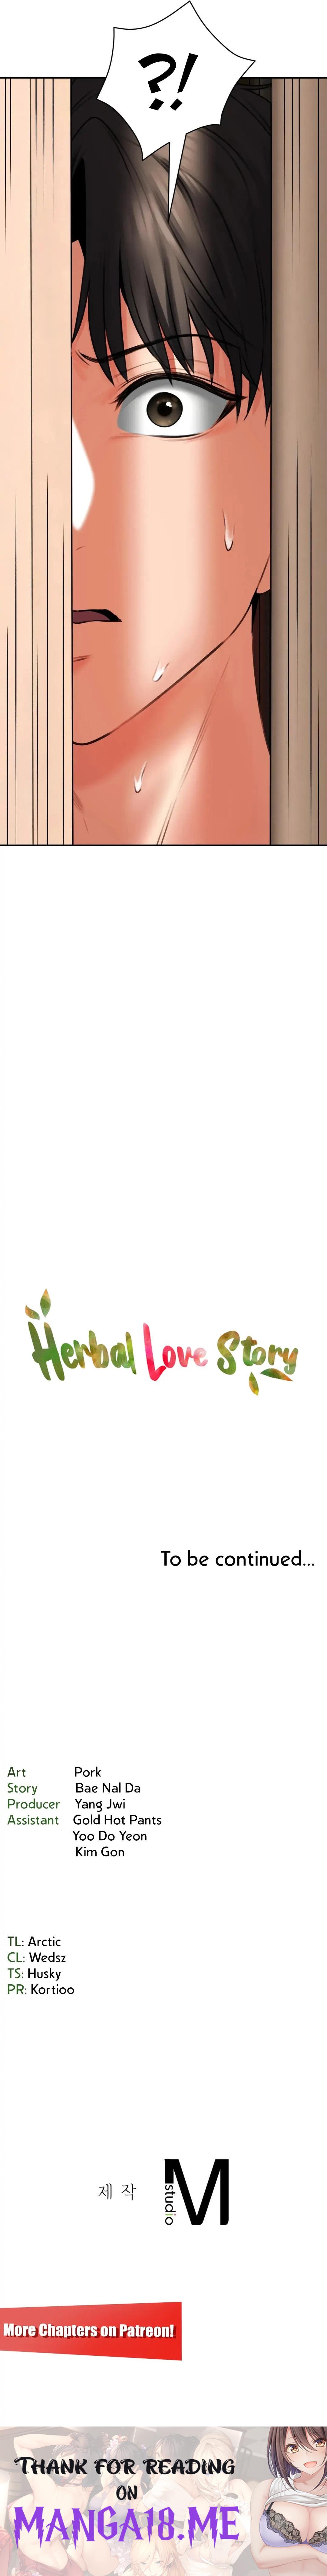 Herbal Love Story - Chapter 3 Page 21